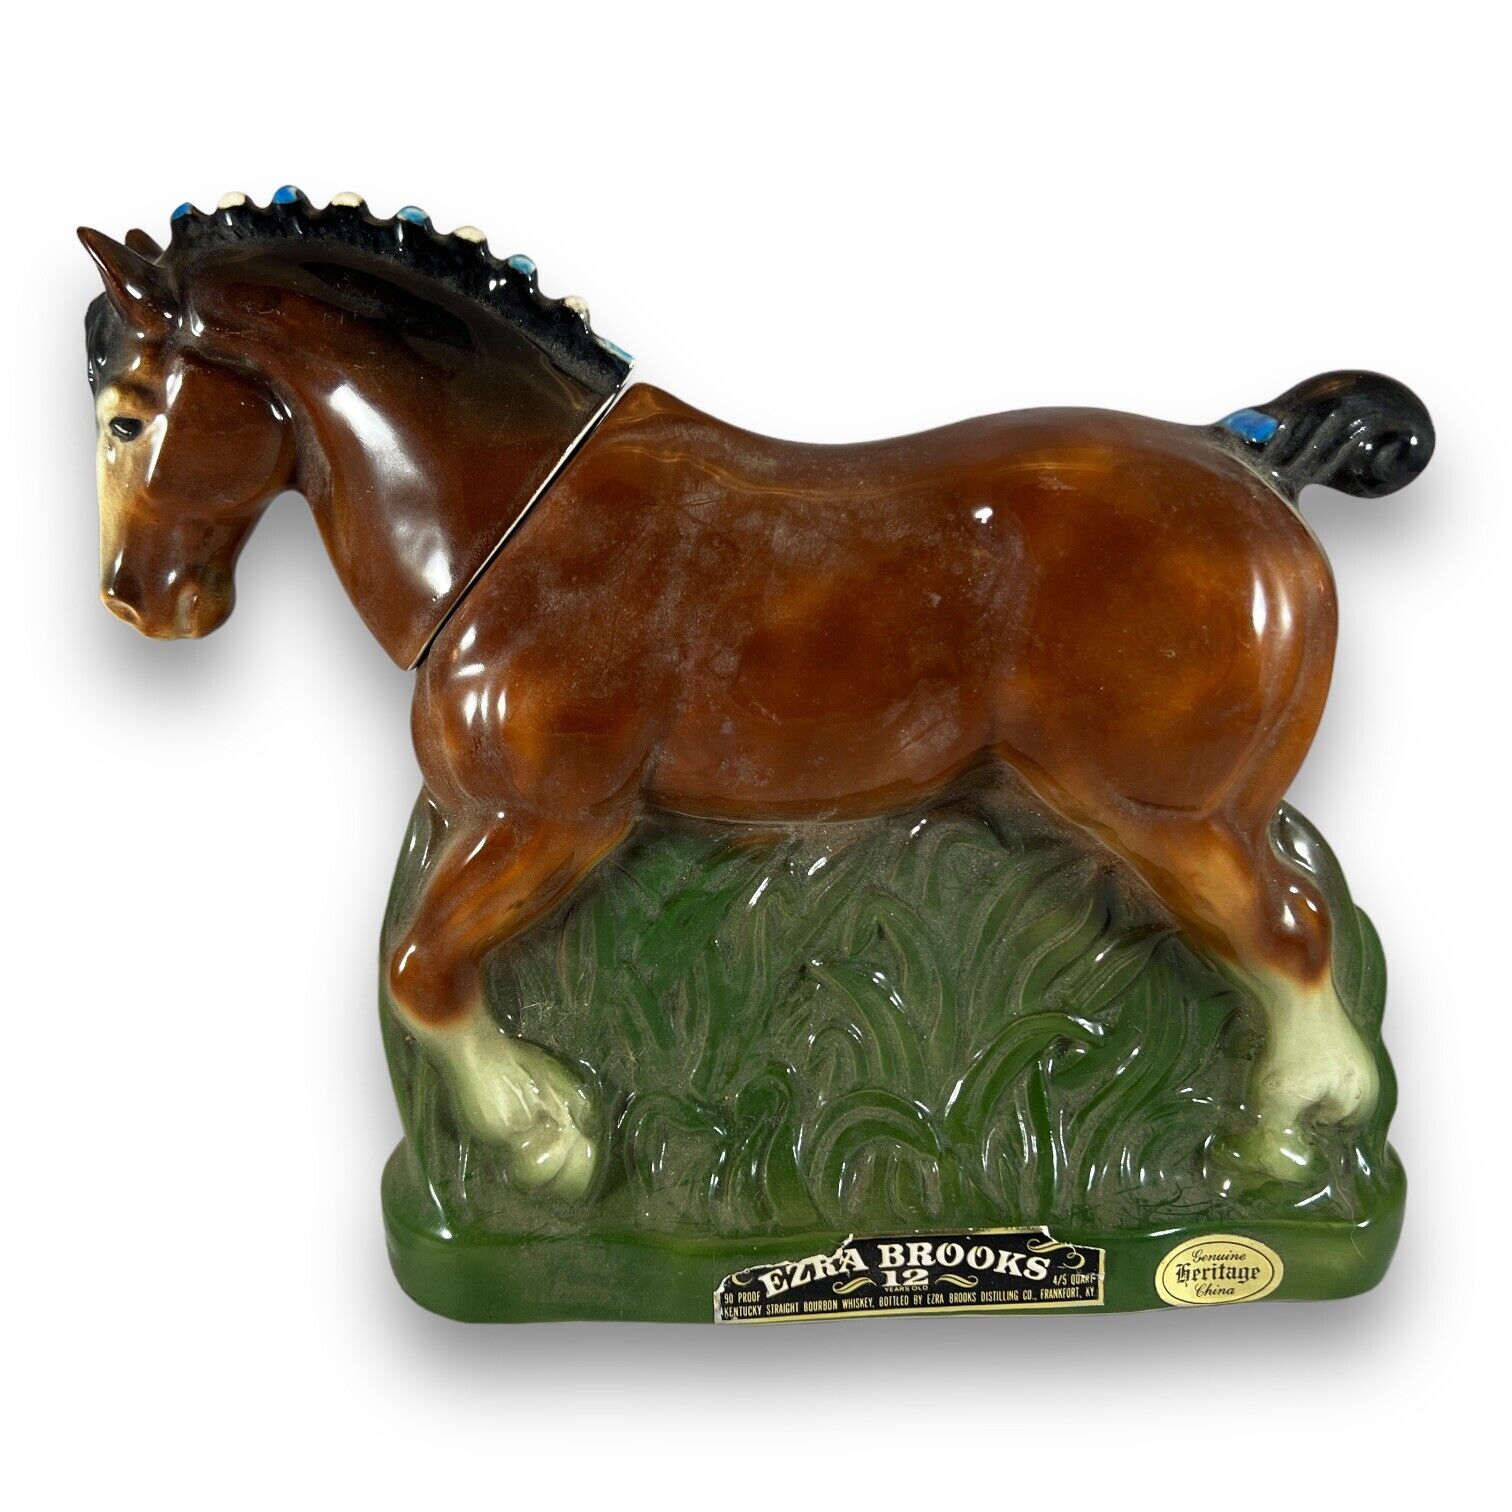 Beautiful Vtg  Ezra Brooks Heritage China  Clydesdale Horse Decanter 1974.